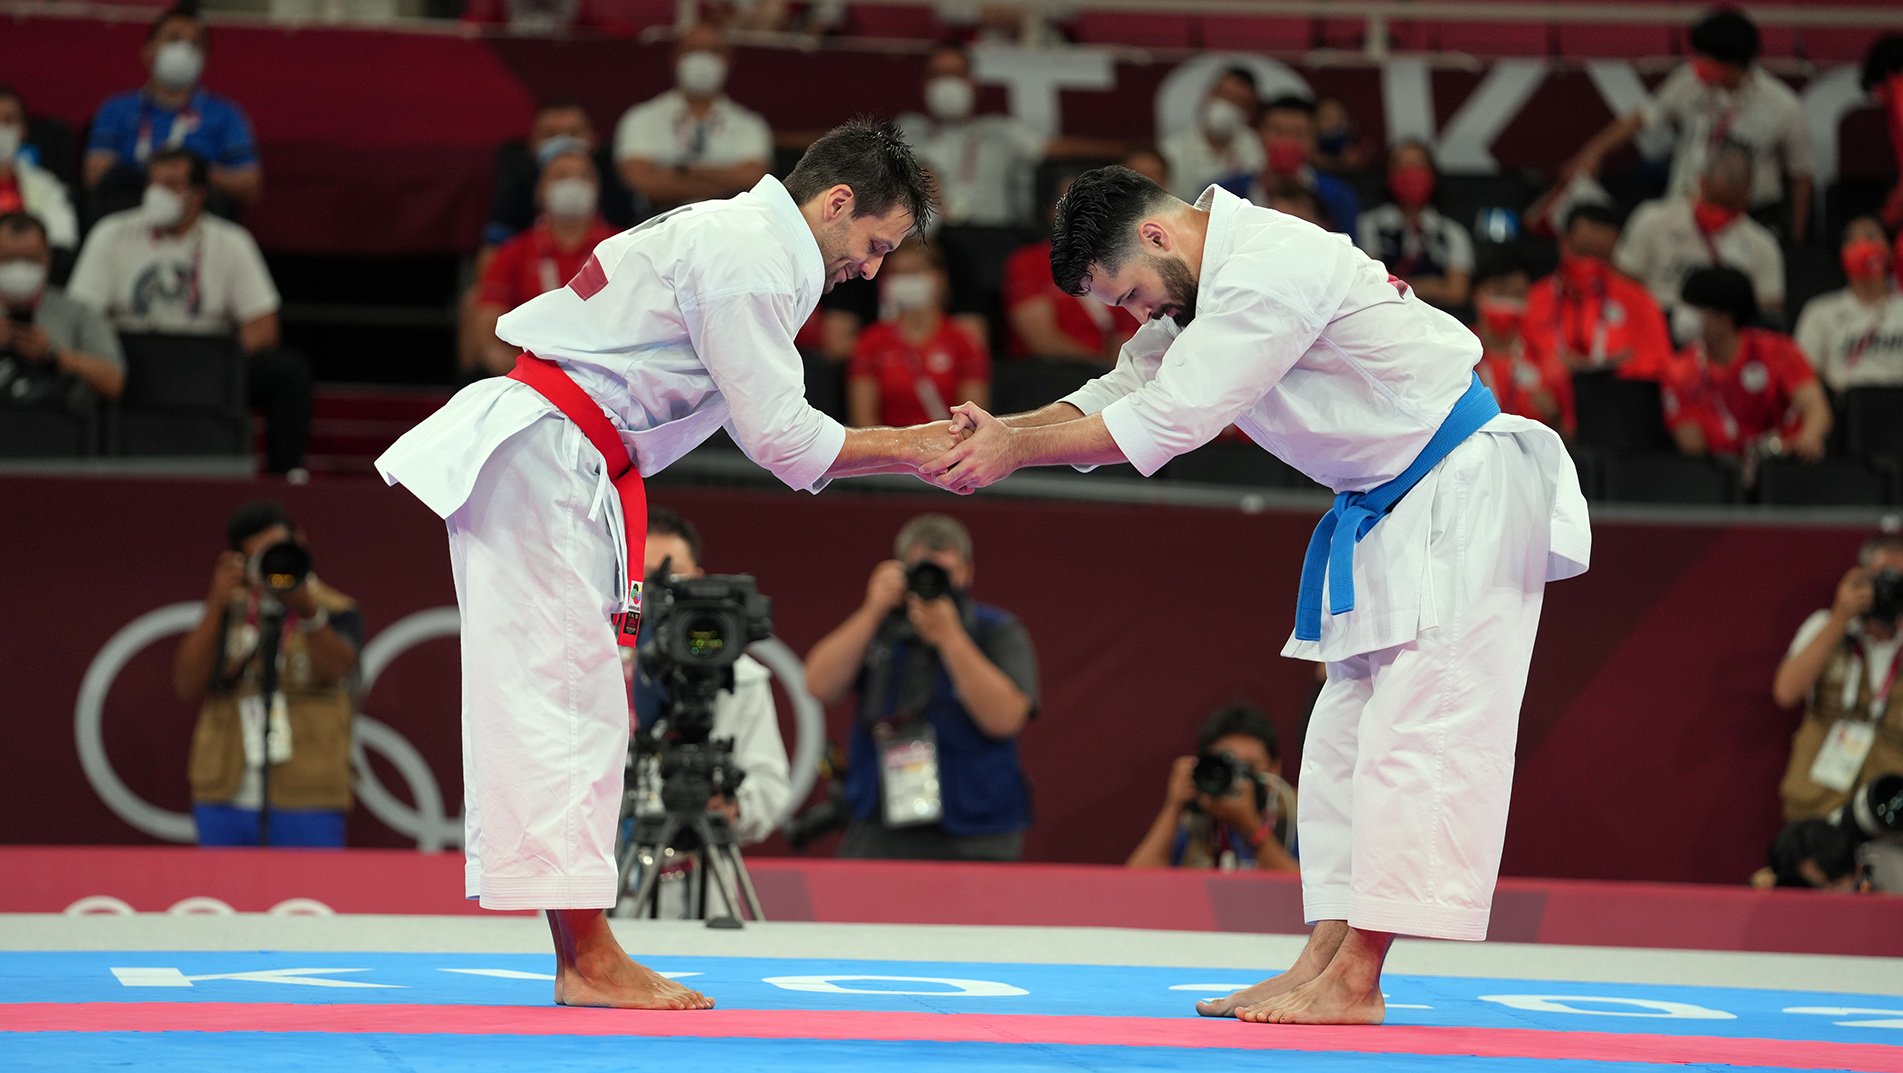 Karate's Olympic debut: Unforgettable from start to finish